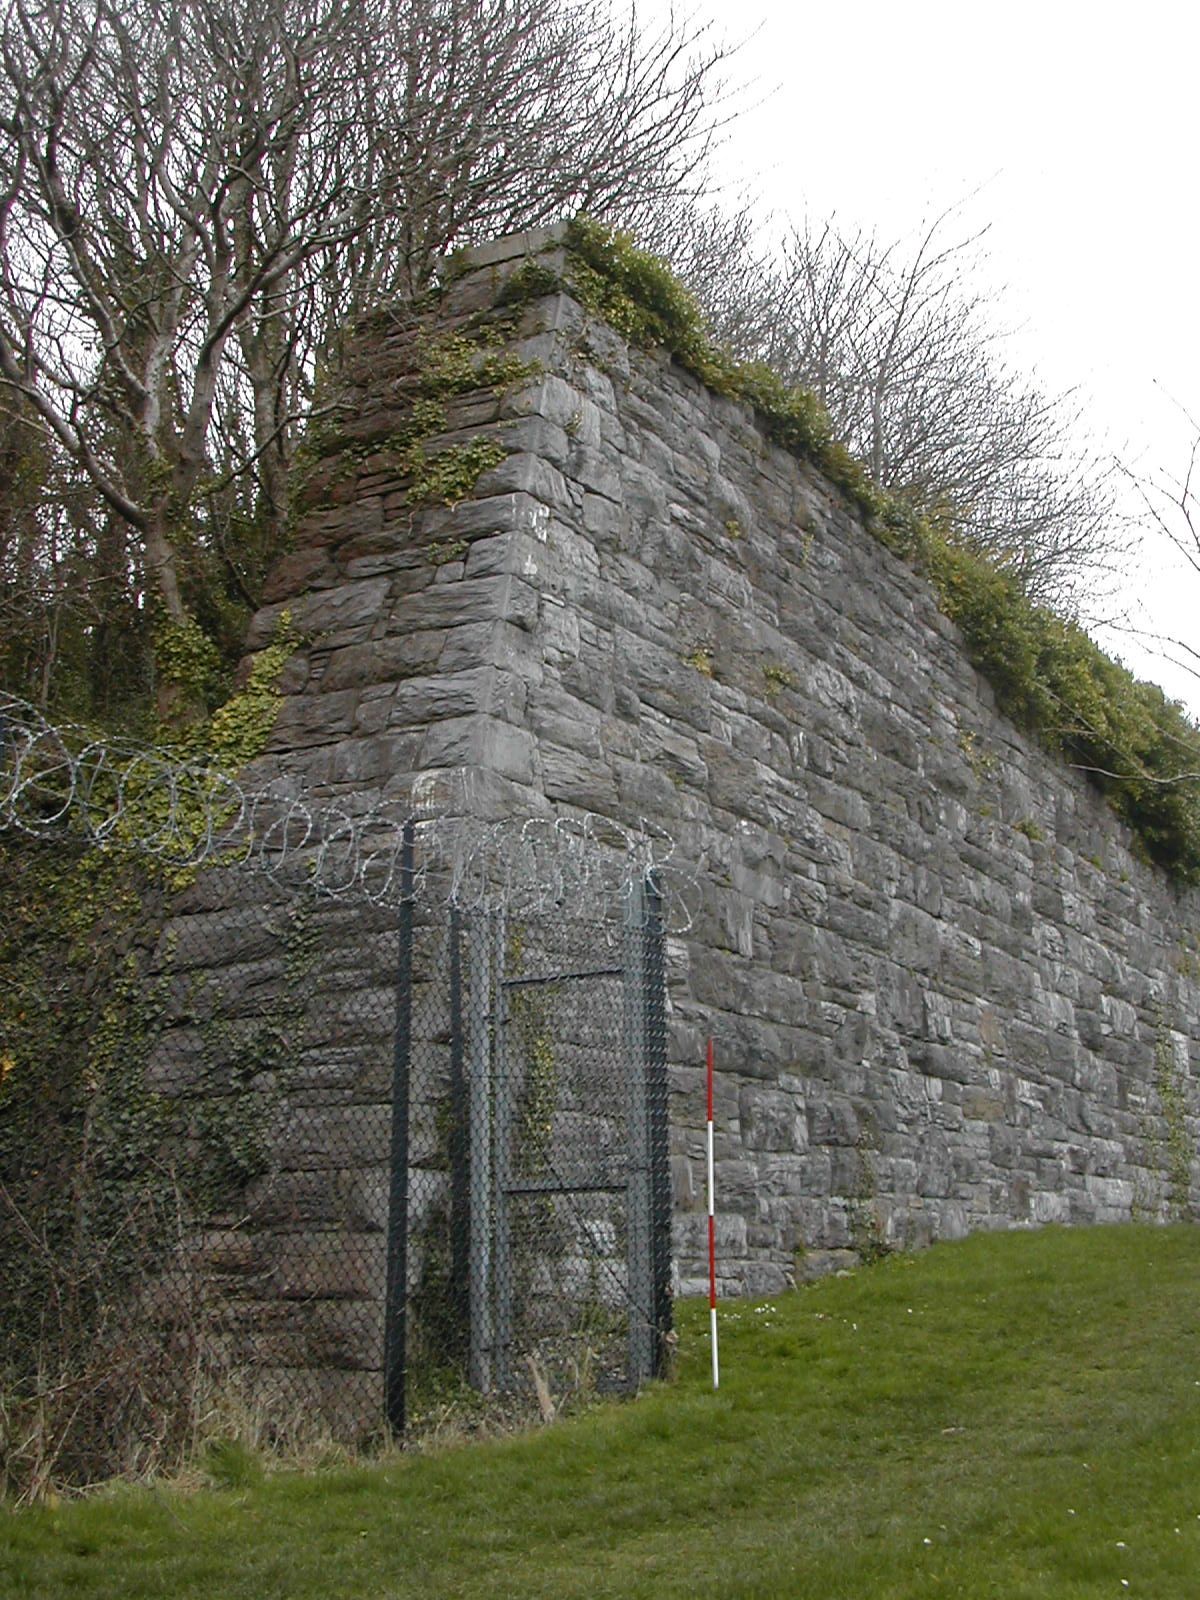 PLymouth Fortification